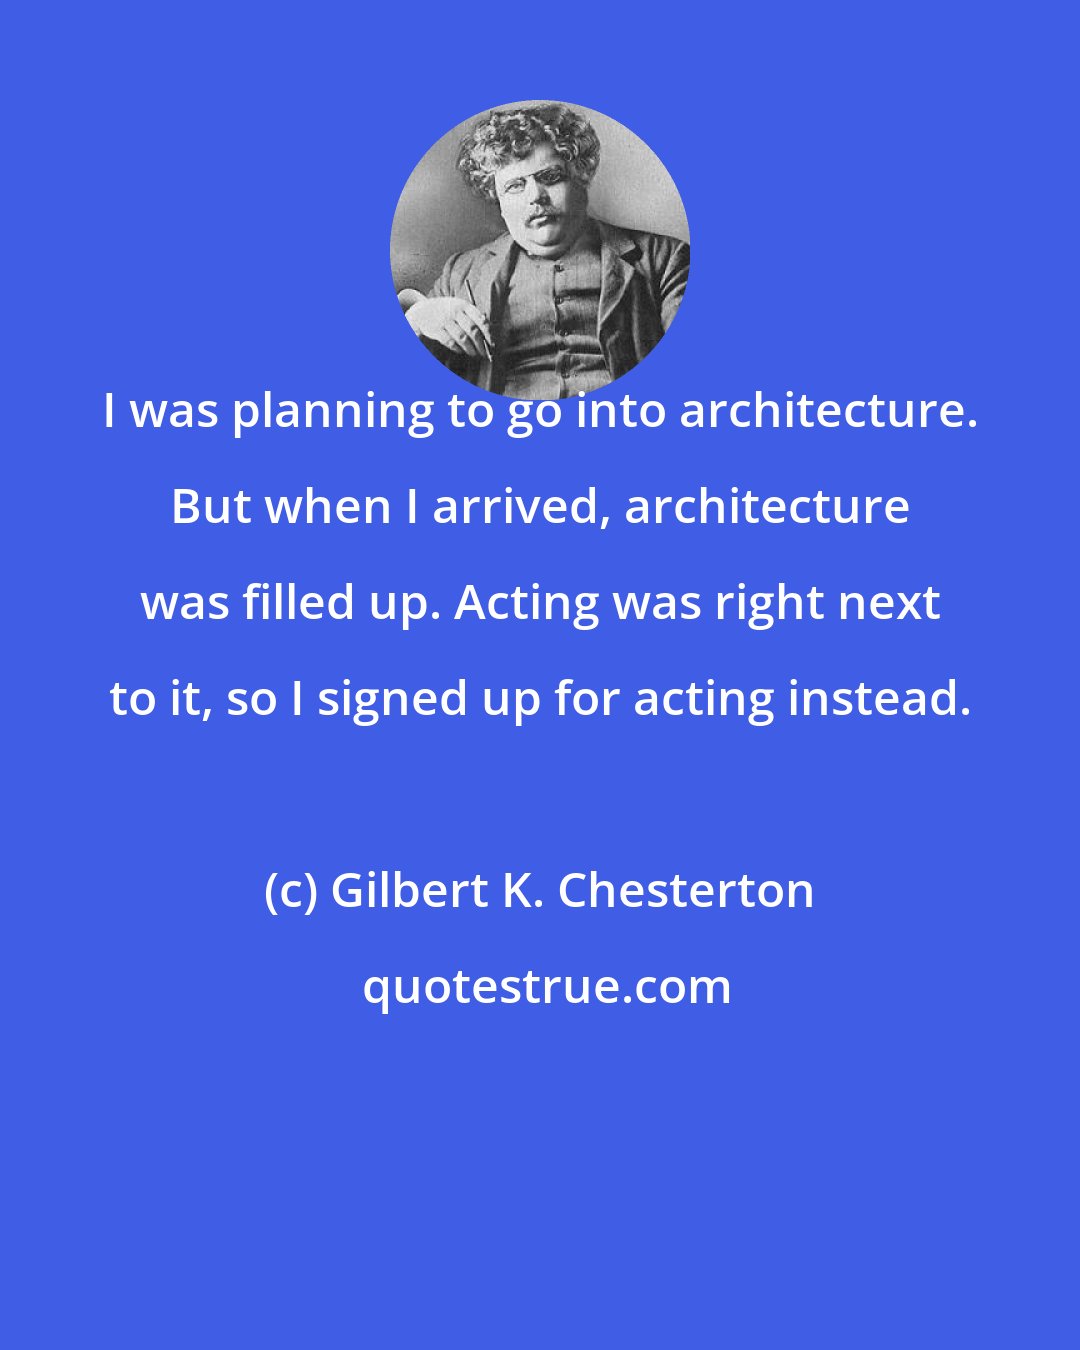 Gilbert K. Chesterton: I was planning to go into architecture. But when I arrived, architecture was filled up. Acting was right next to it, so I signed up for acting instead.